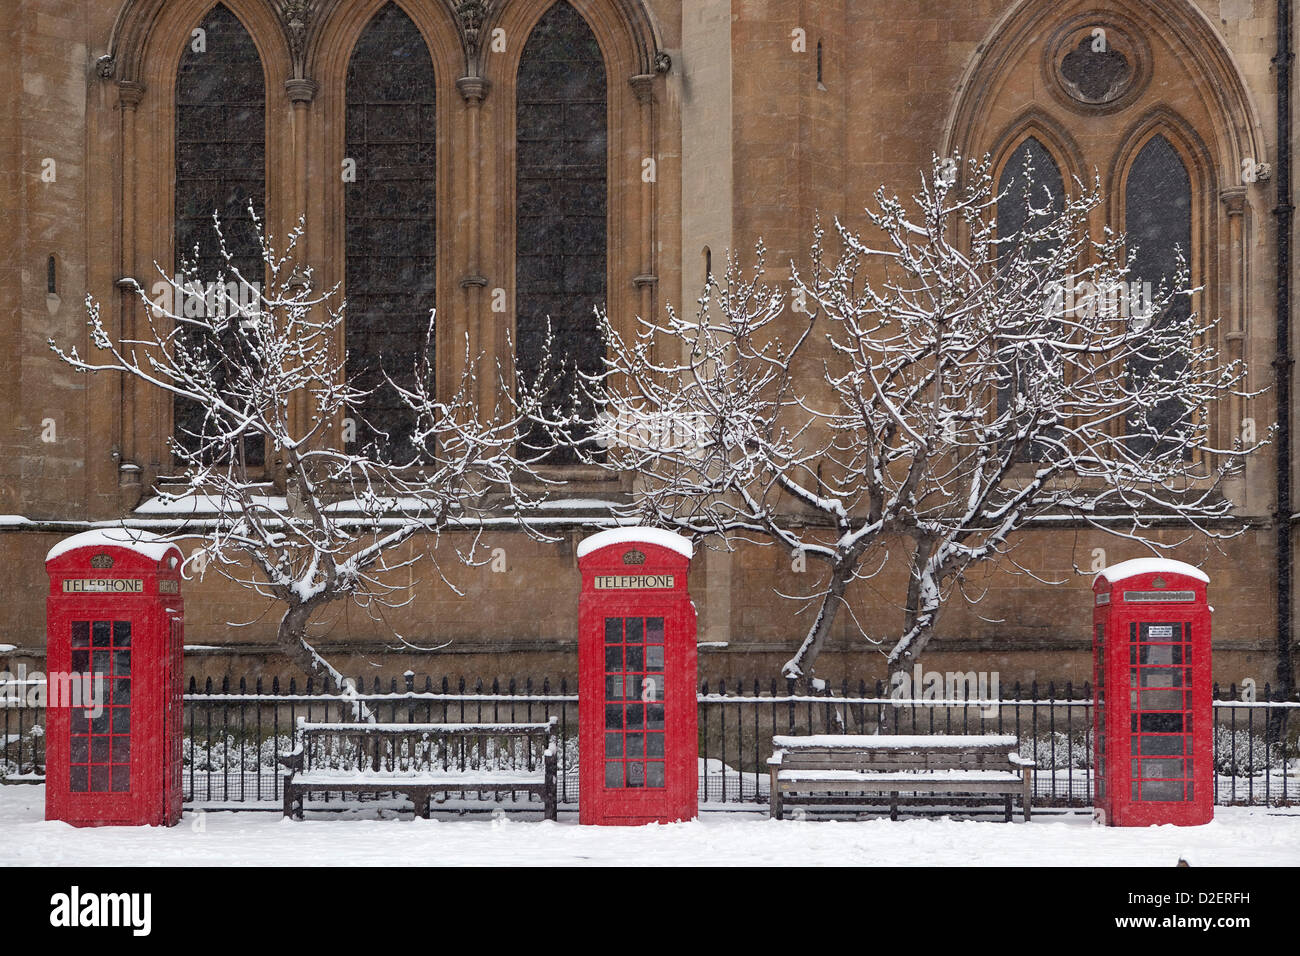 snow in Byng Place, Gordon Square, Bloomsbury, London, United Kingdom Stock Photo